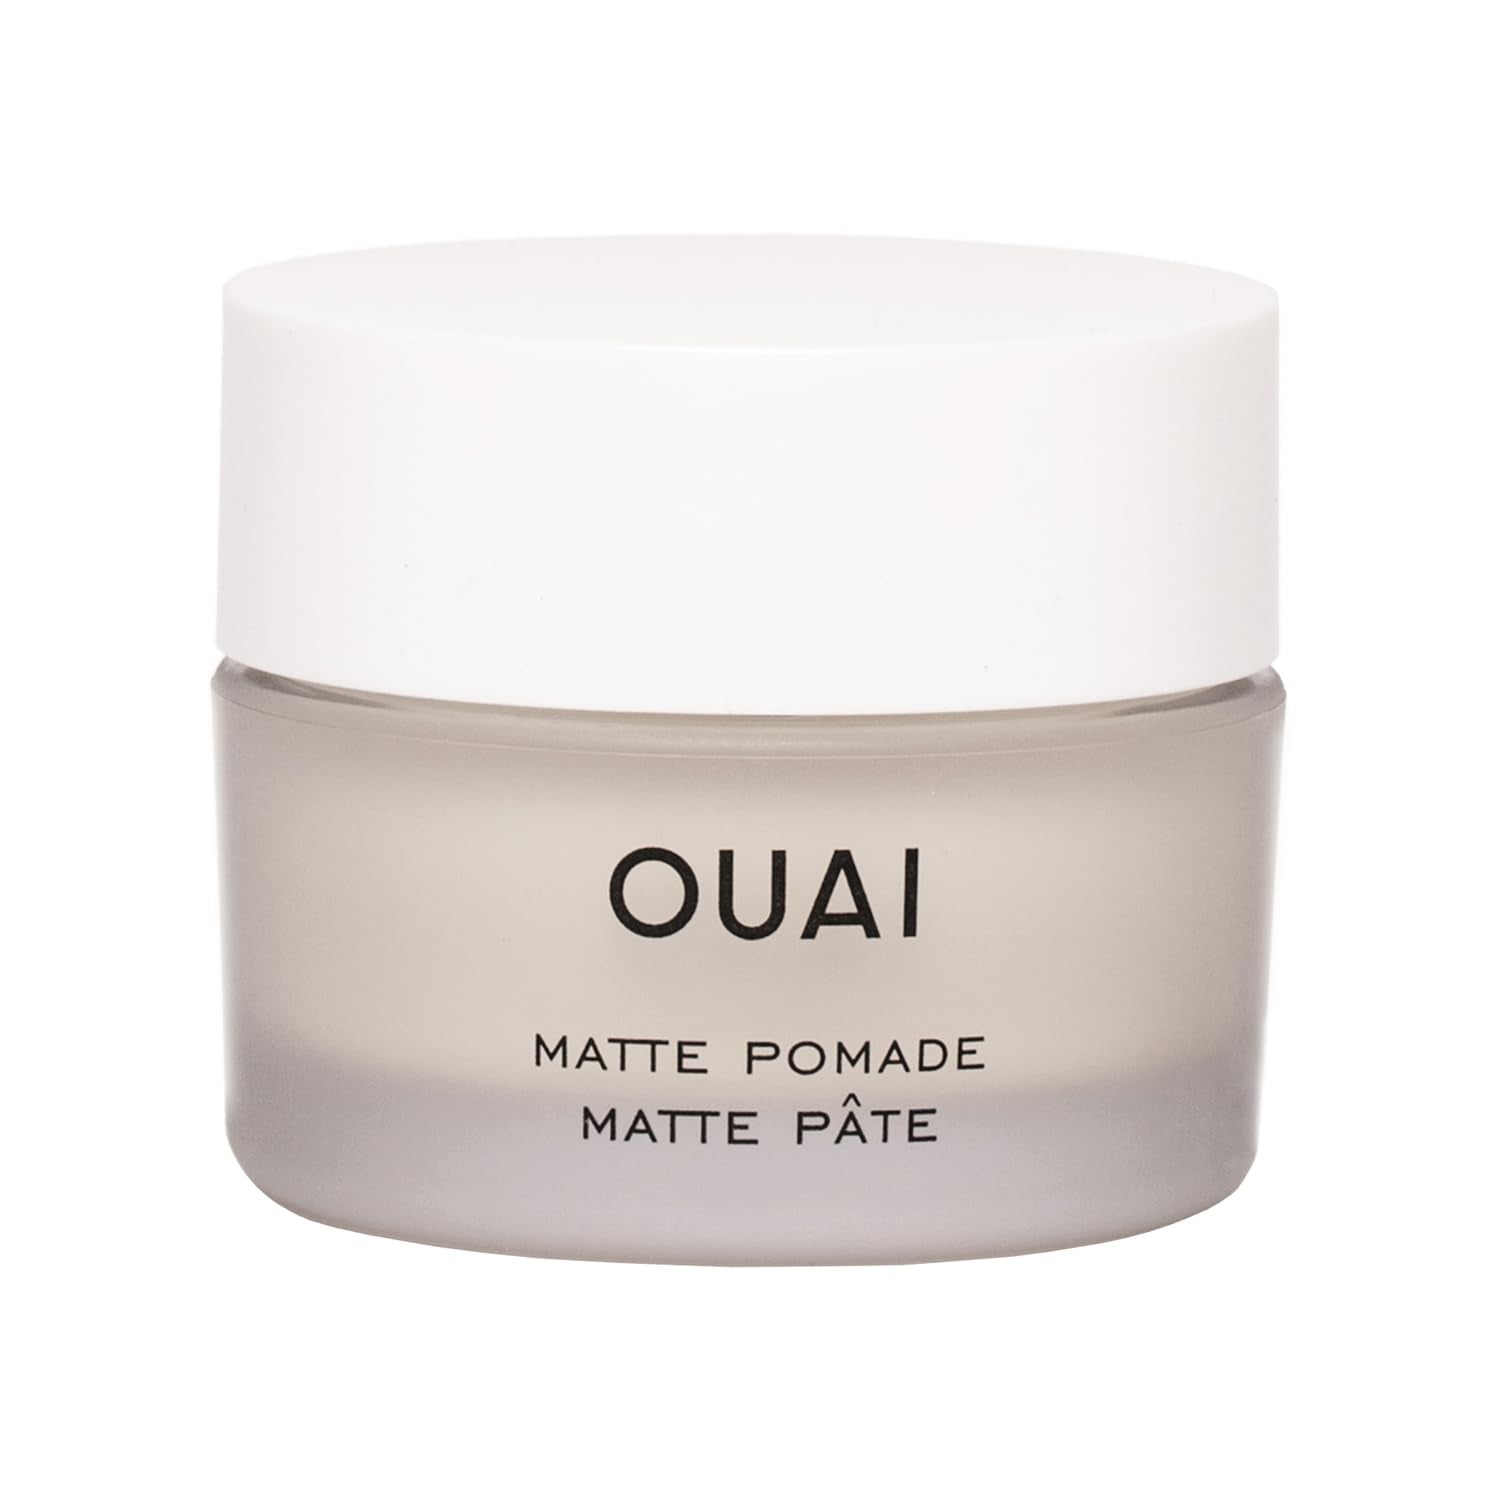 OUAI Matte Hair Pomade - Styling Paste for Moldable Hold, Texture, Separation & Frizz Control - Leaves Matte Finish for Cool Yet Casual Hair - Paraben Free Hair Styling Products (1.7 Oz)